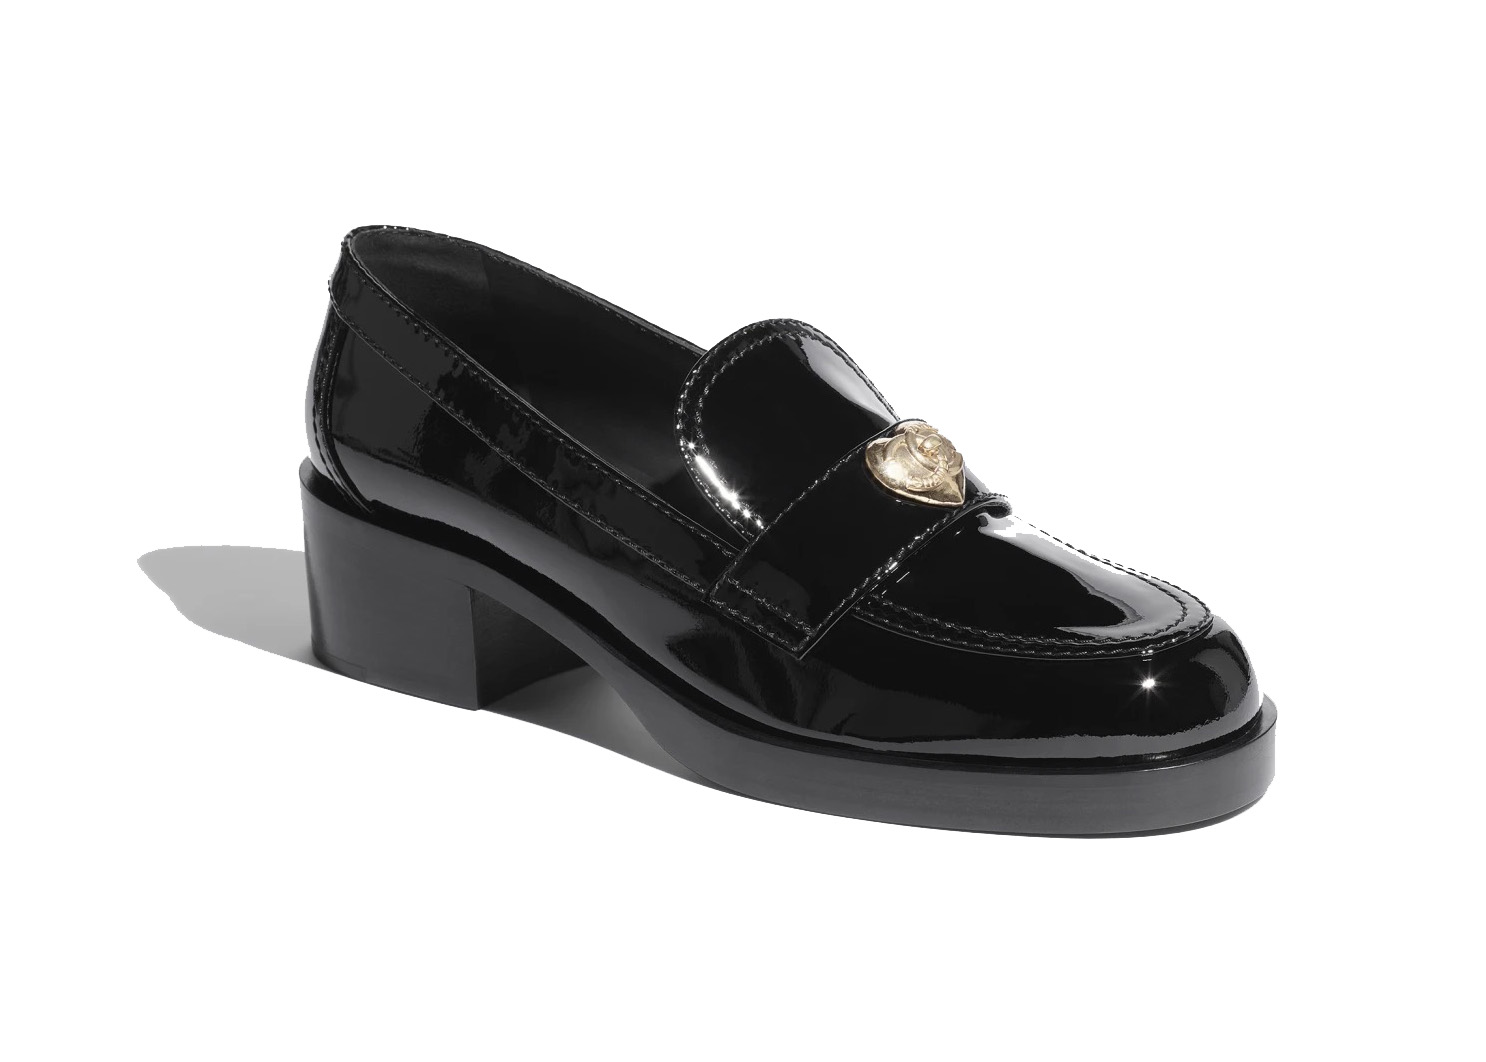 Shop CHANEL Loafers G40027 X56931 0S792 G40027 X56931 94305 by MINIs   BUYMA